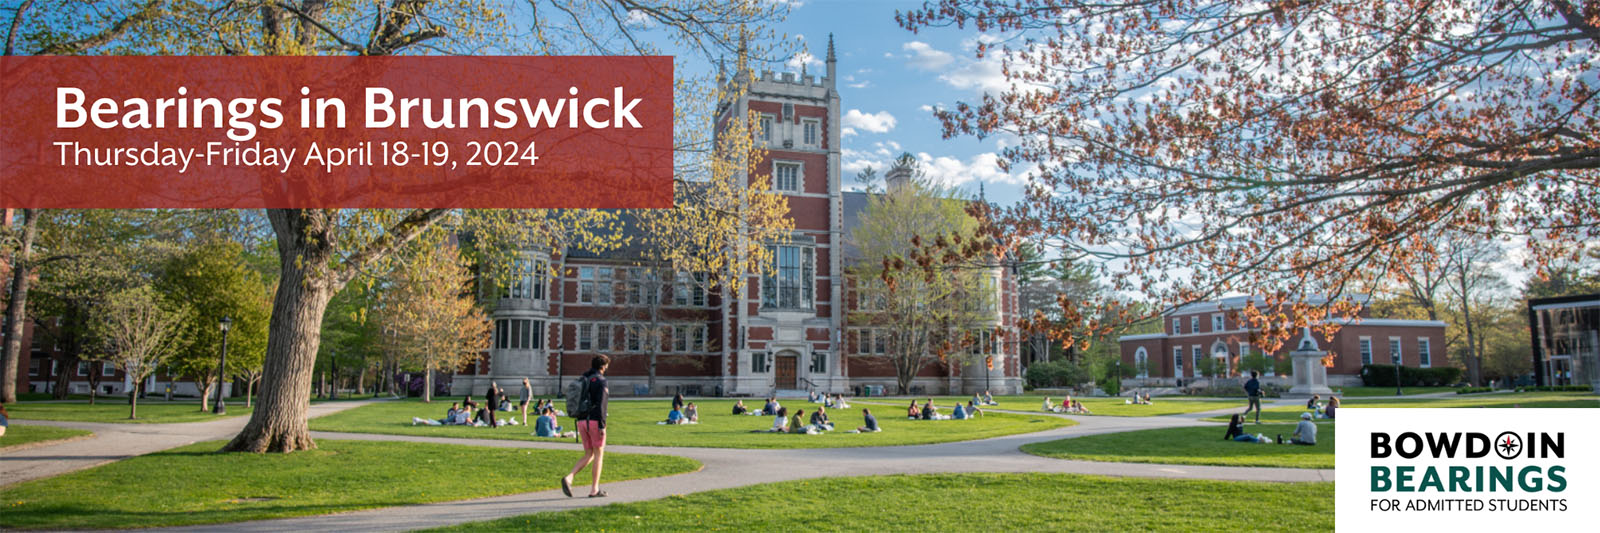 An image of the Bowdoin College quad in the spring with the text "Bearings in Brunswick: Thursday-Friday April 18-19, 2024" 